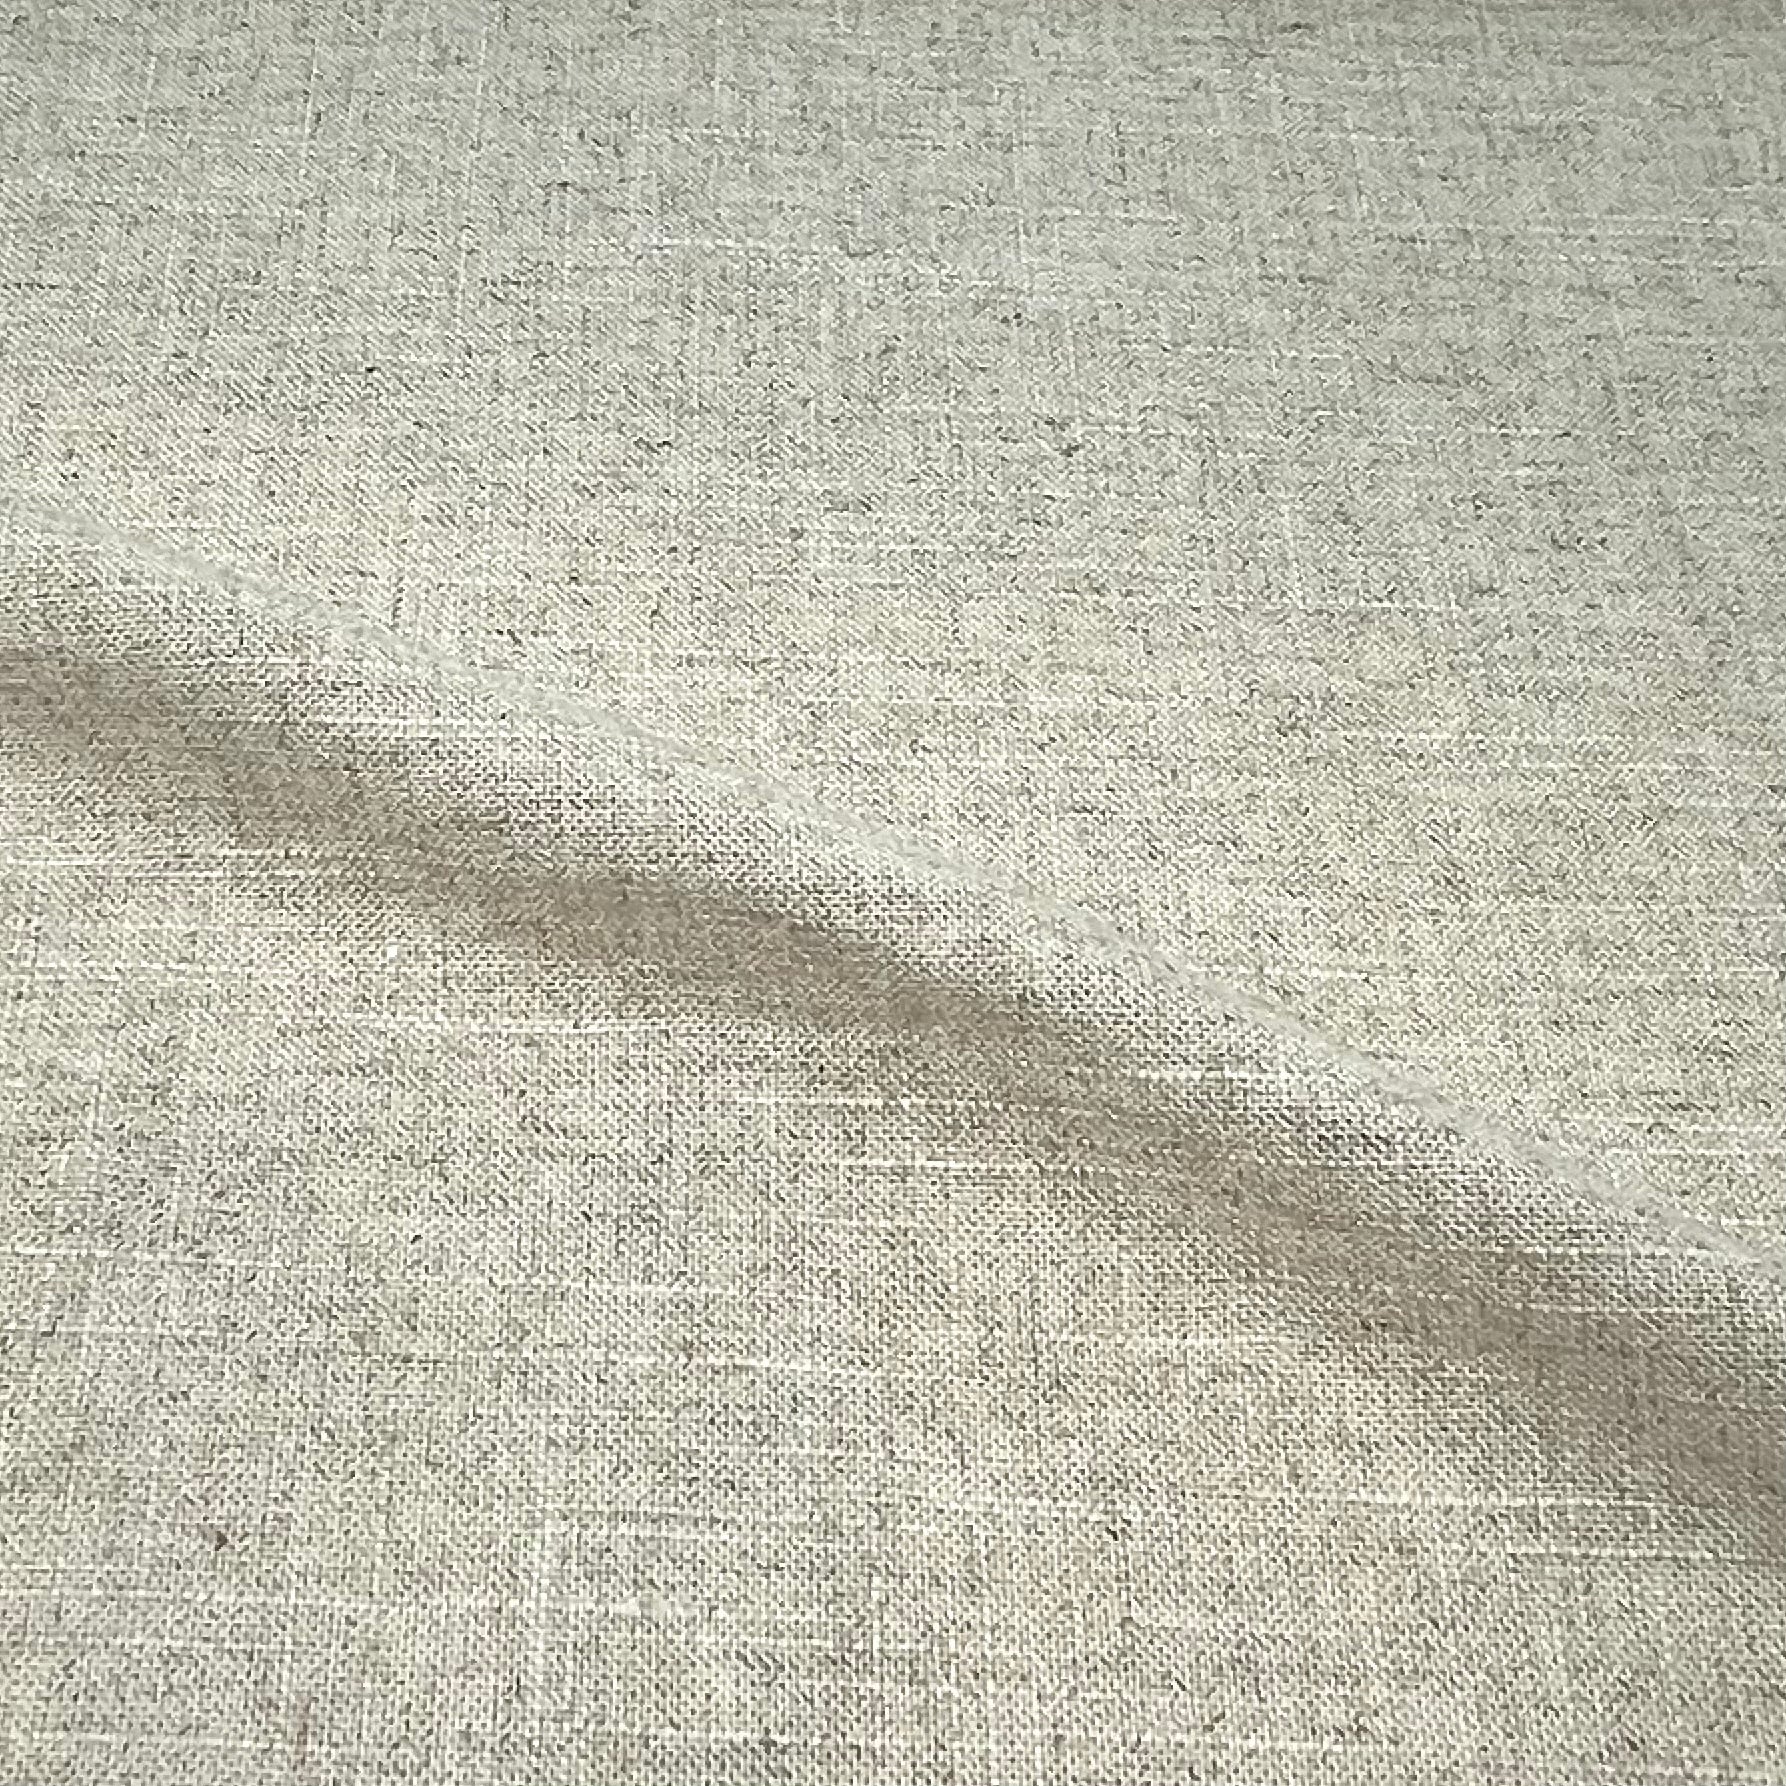 Solid Sheer Net Linen Blend Fabric By The Yard, Curtain, Drapery, Table Top, 118" Width/CL1063